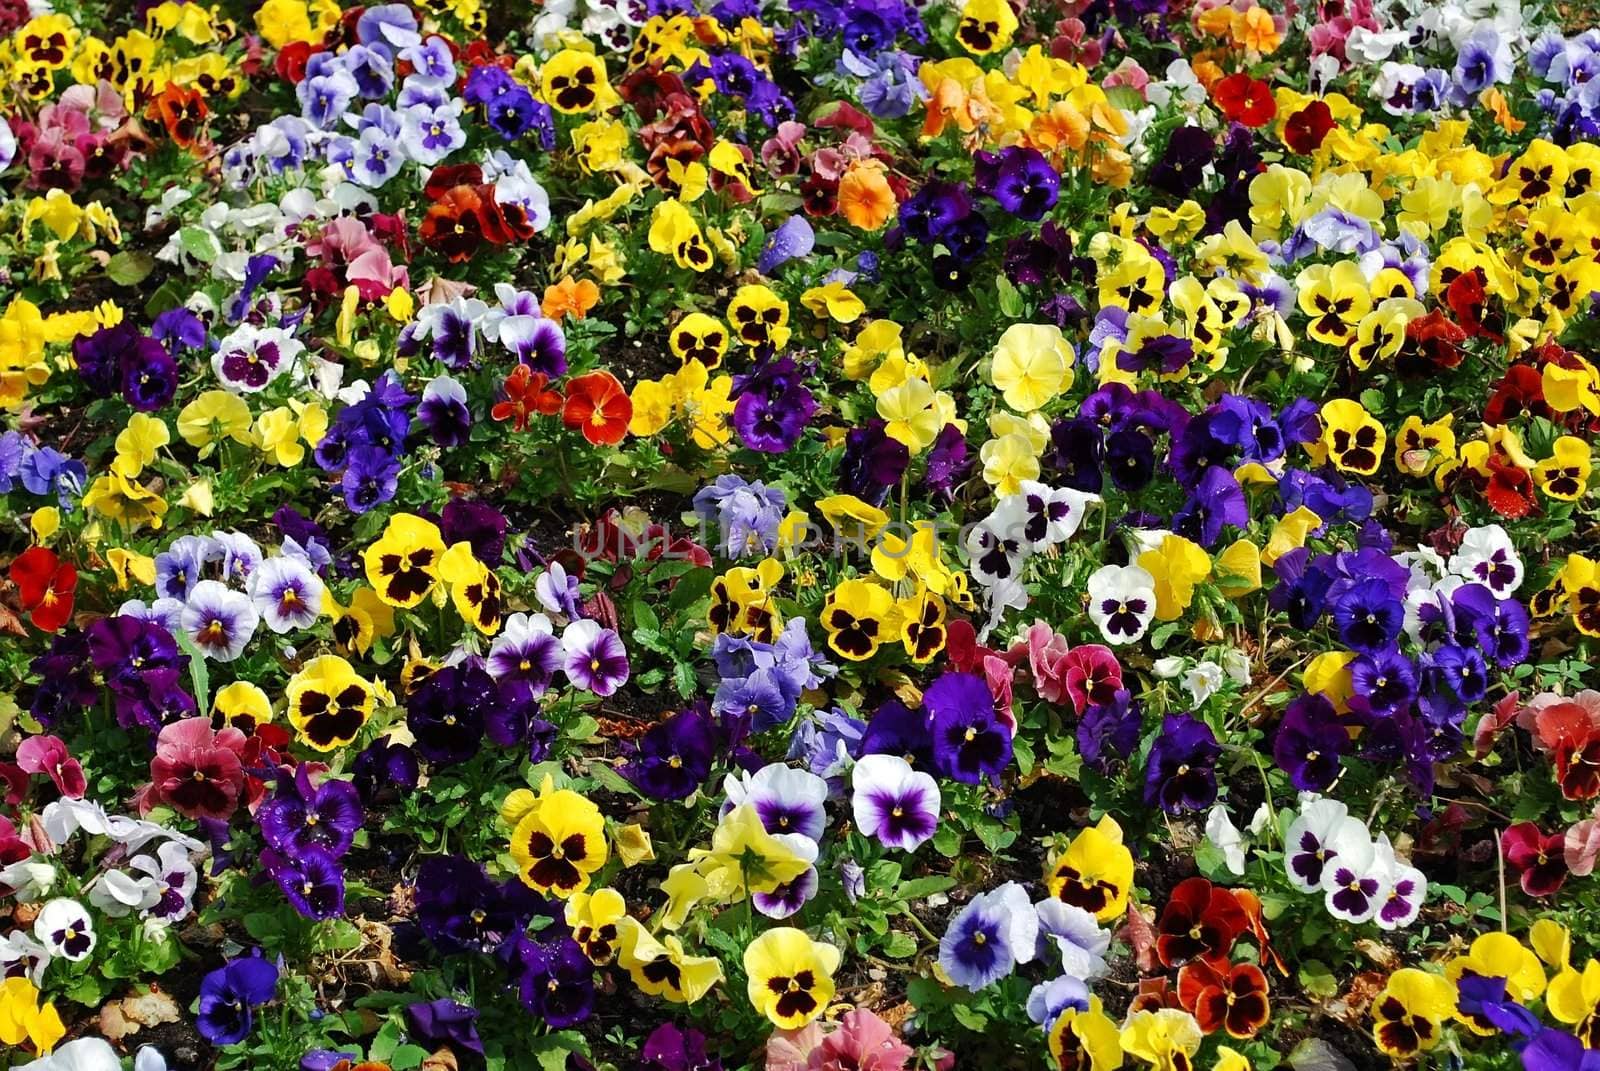 Colorful flower carpet in a park - pansies.